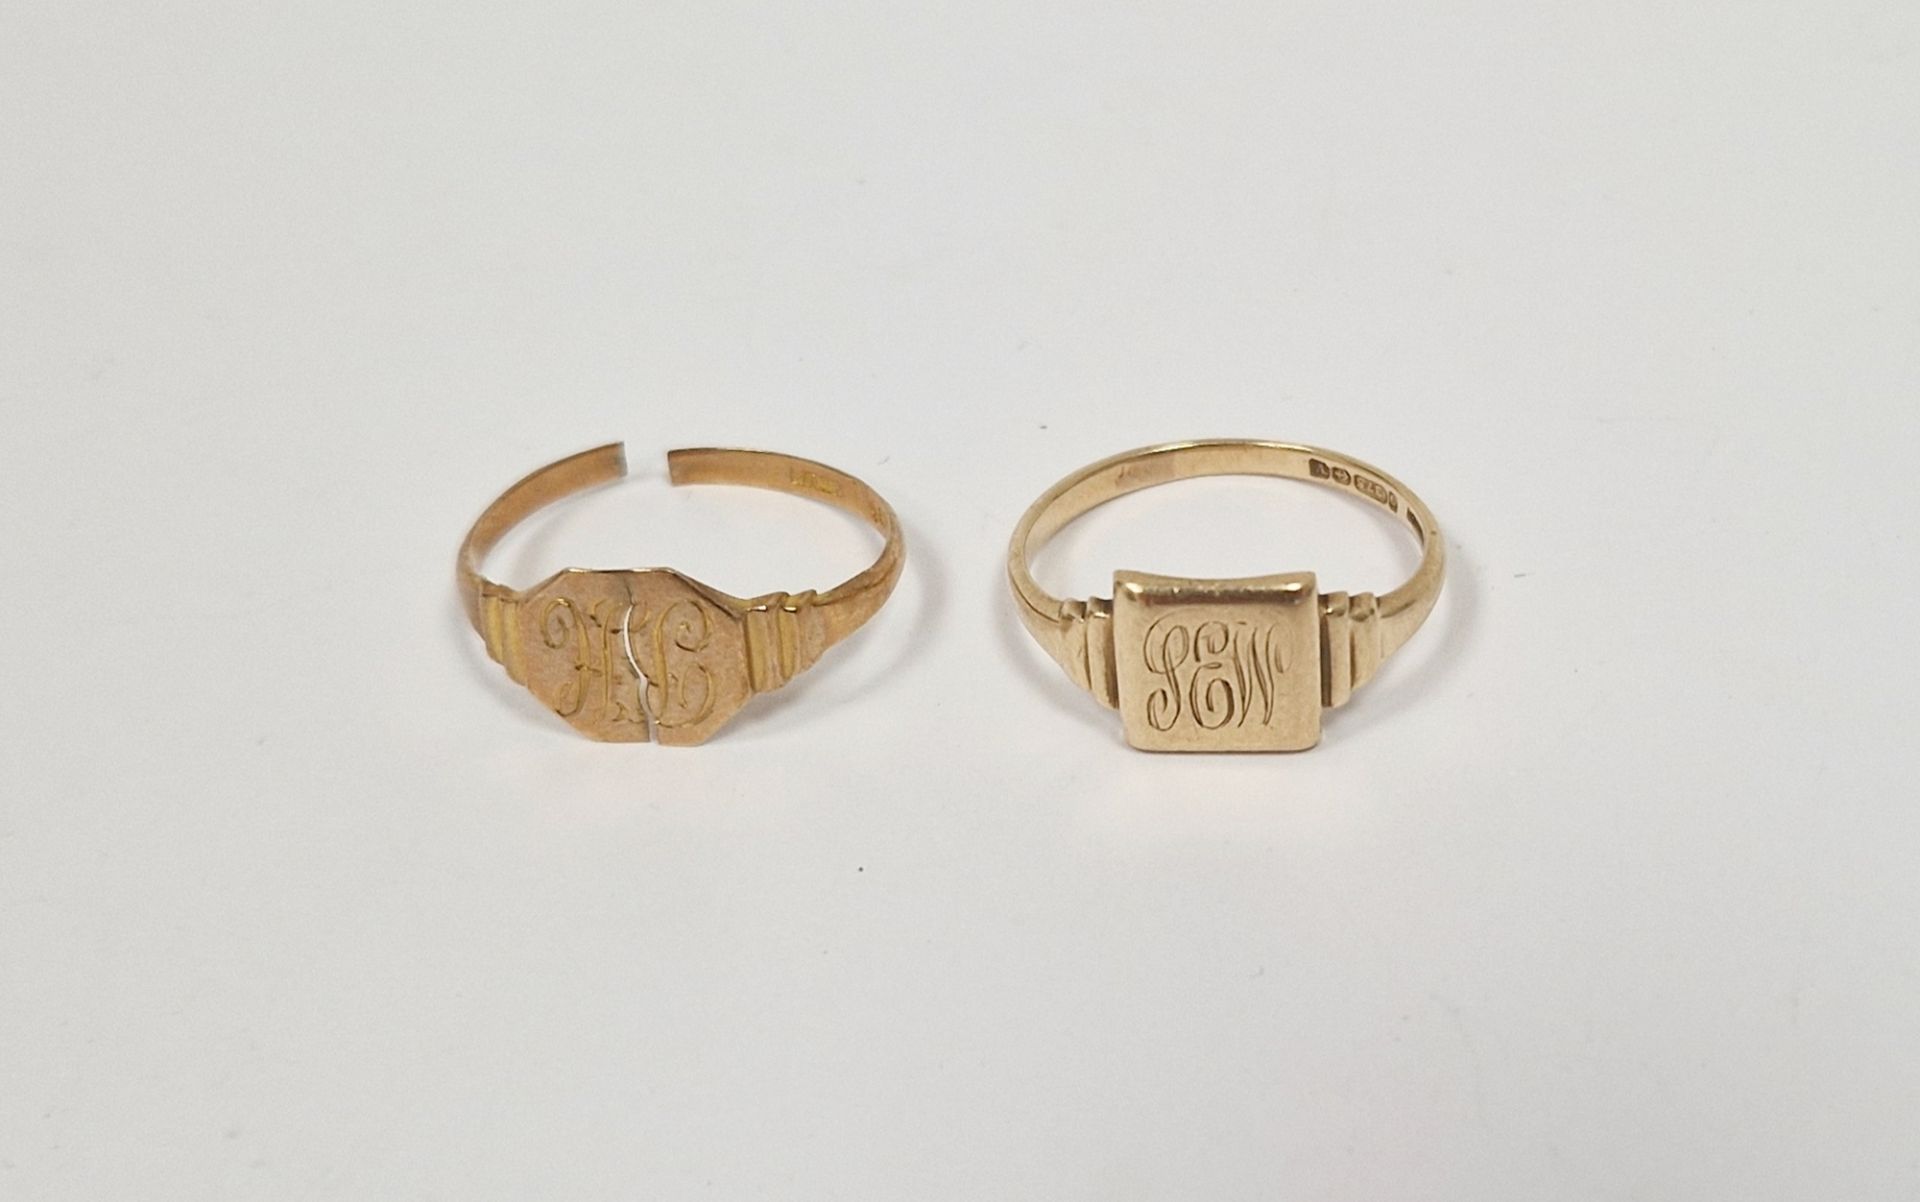 Gentleman's 9ct gold art deco style signet ring, together with another 9ct gold signet ring (cut) - Image 2 of 2